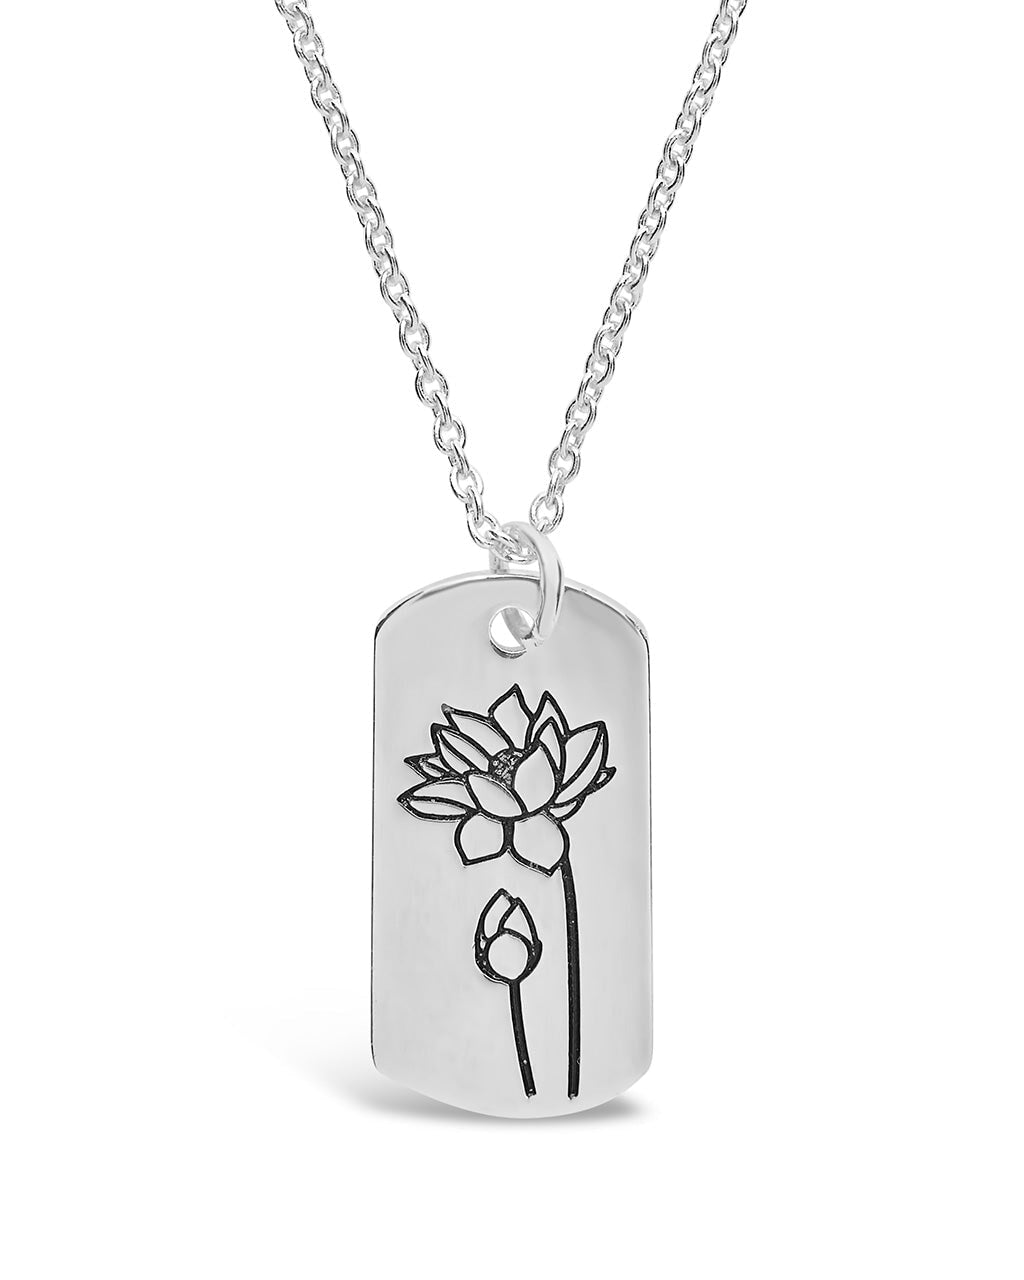 Birth Flower Pendant Necklace Sterling Forever Silver July / Water Lily 